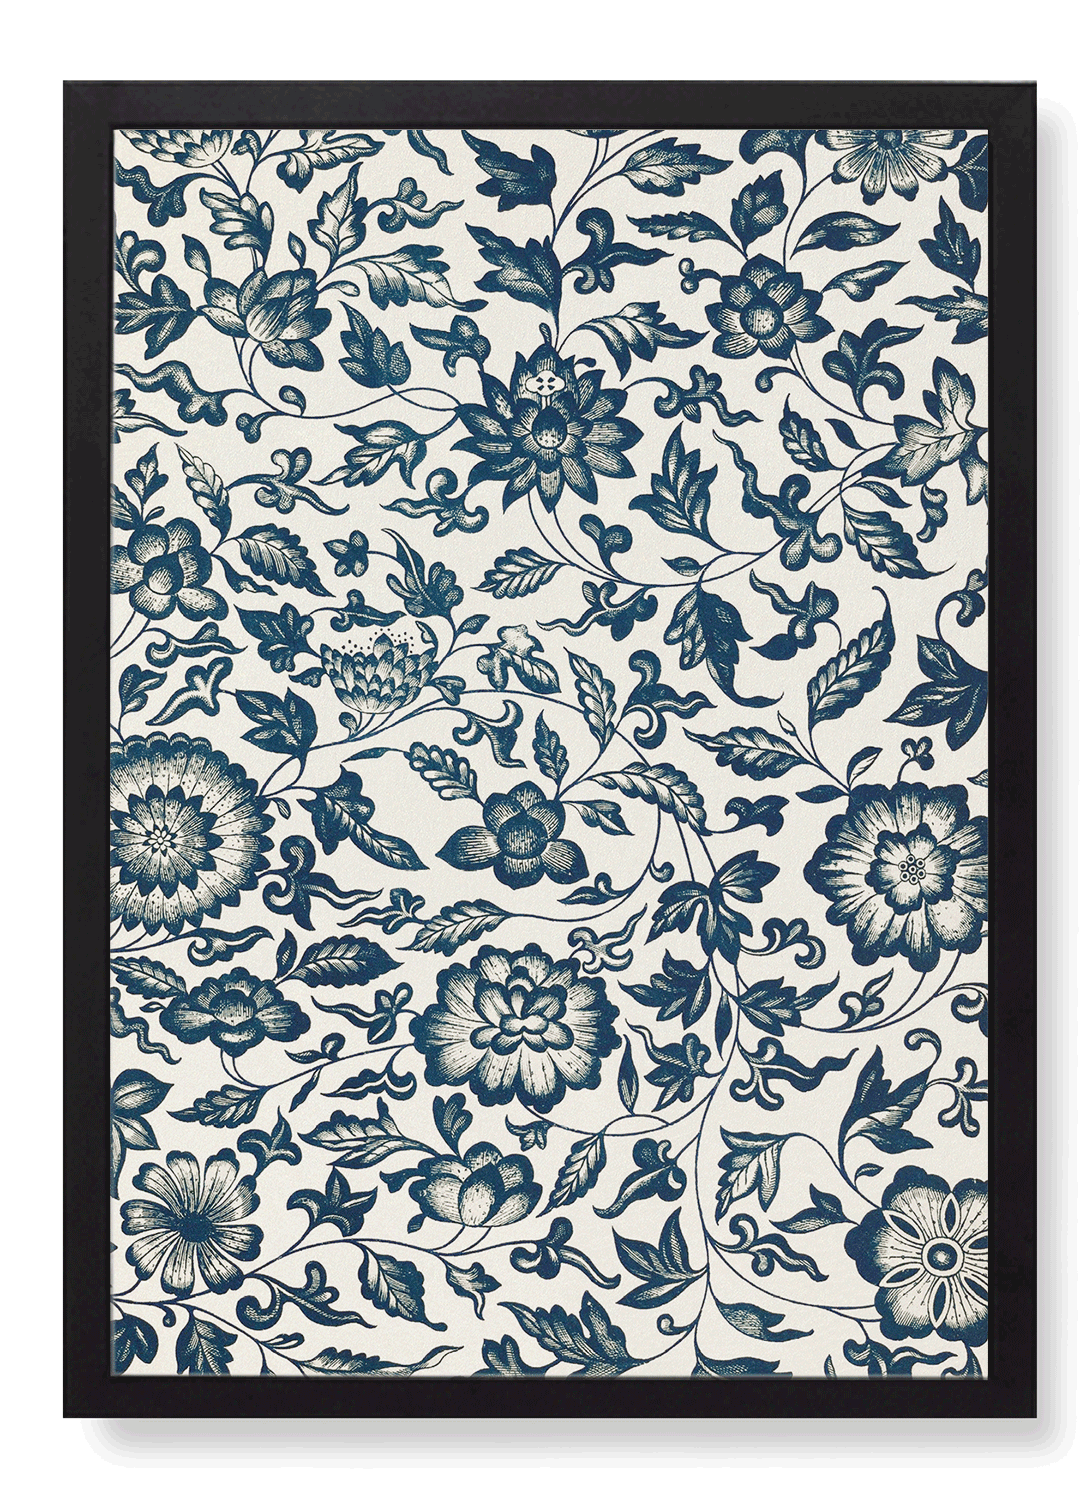 FLORAL BLUE AND WHITE MOTIF